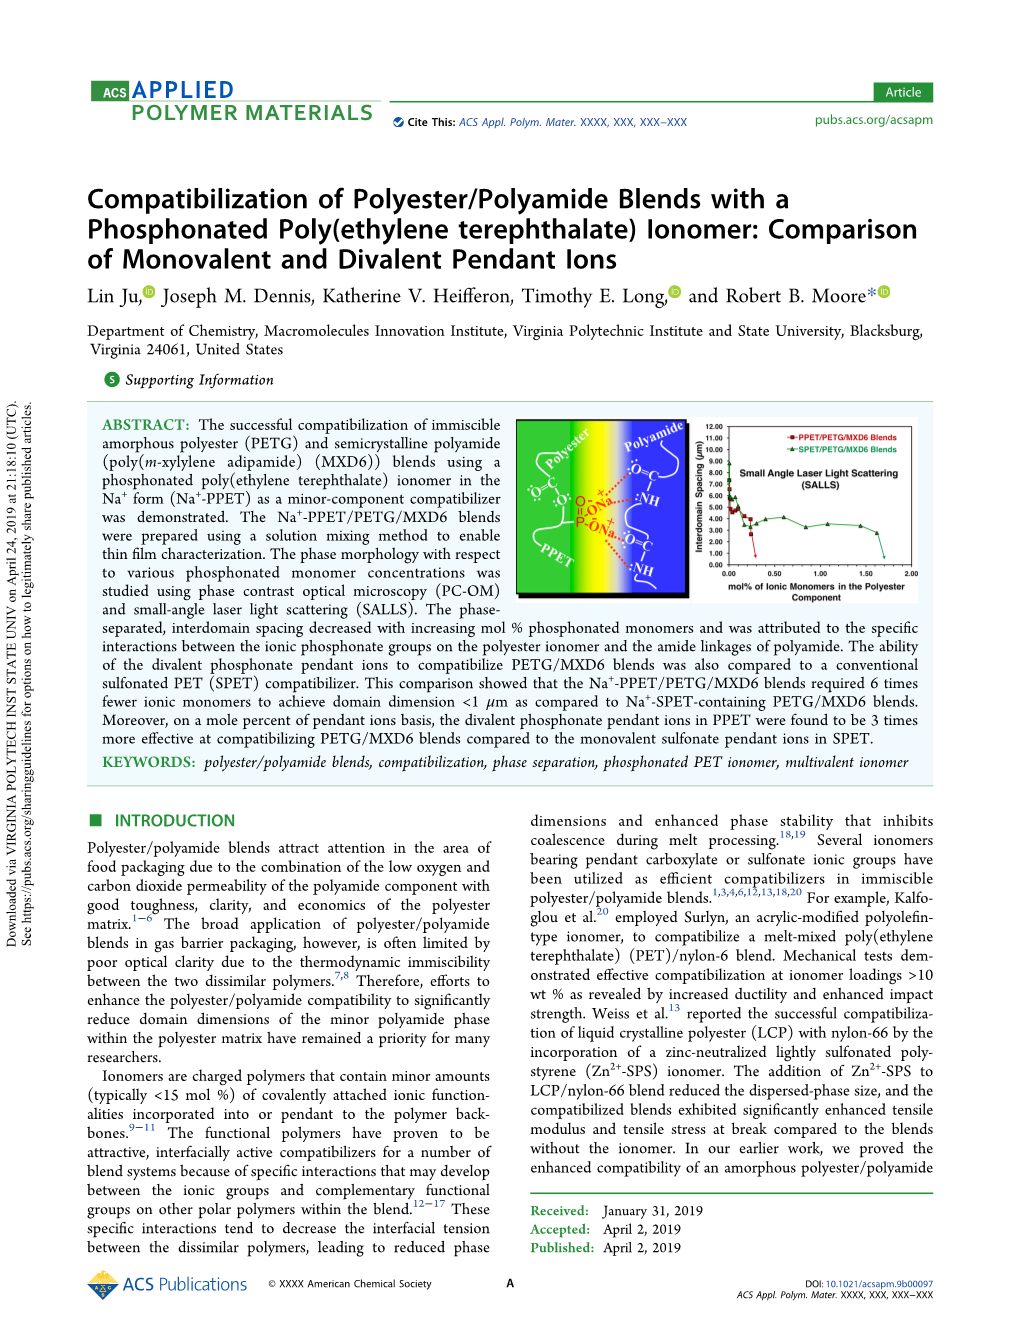 Compatibilization of Polyester/Polyamide Blends with A